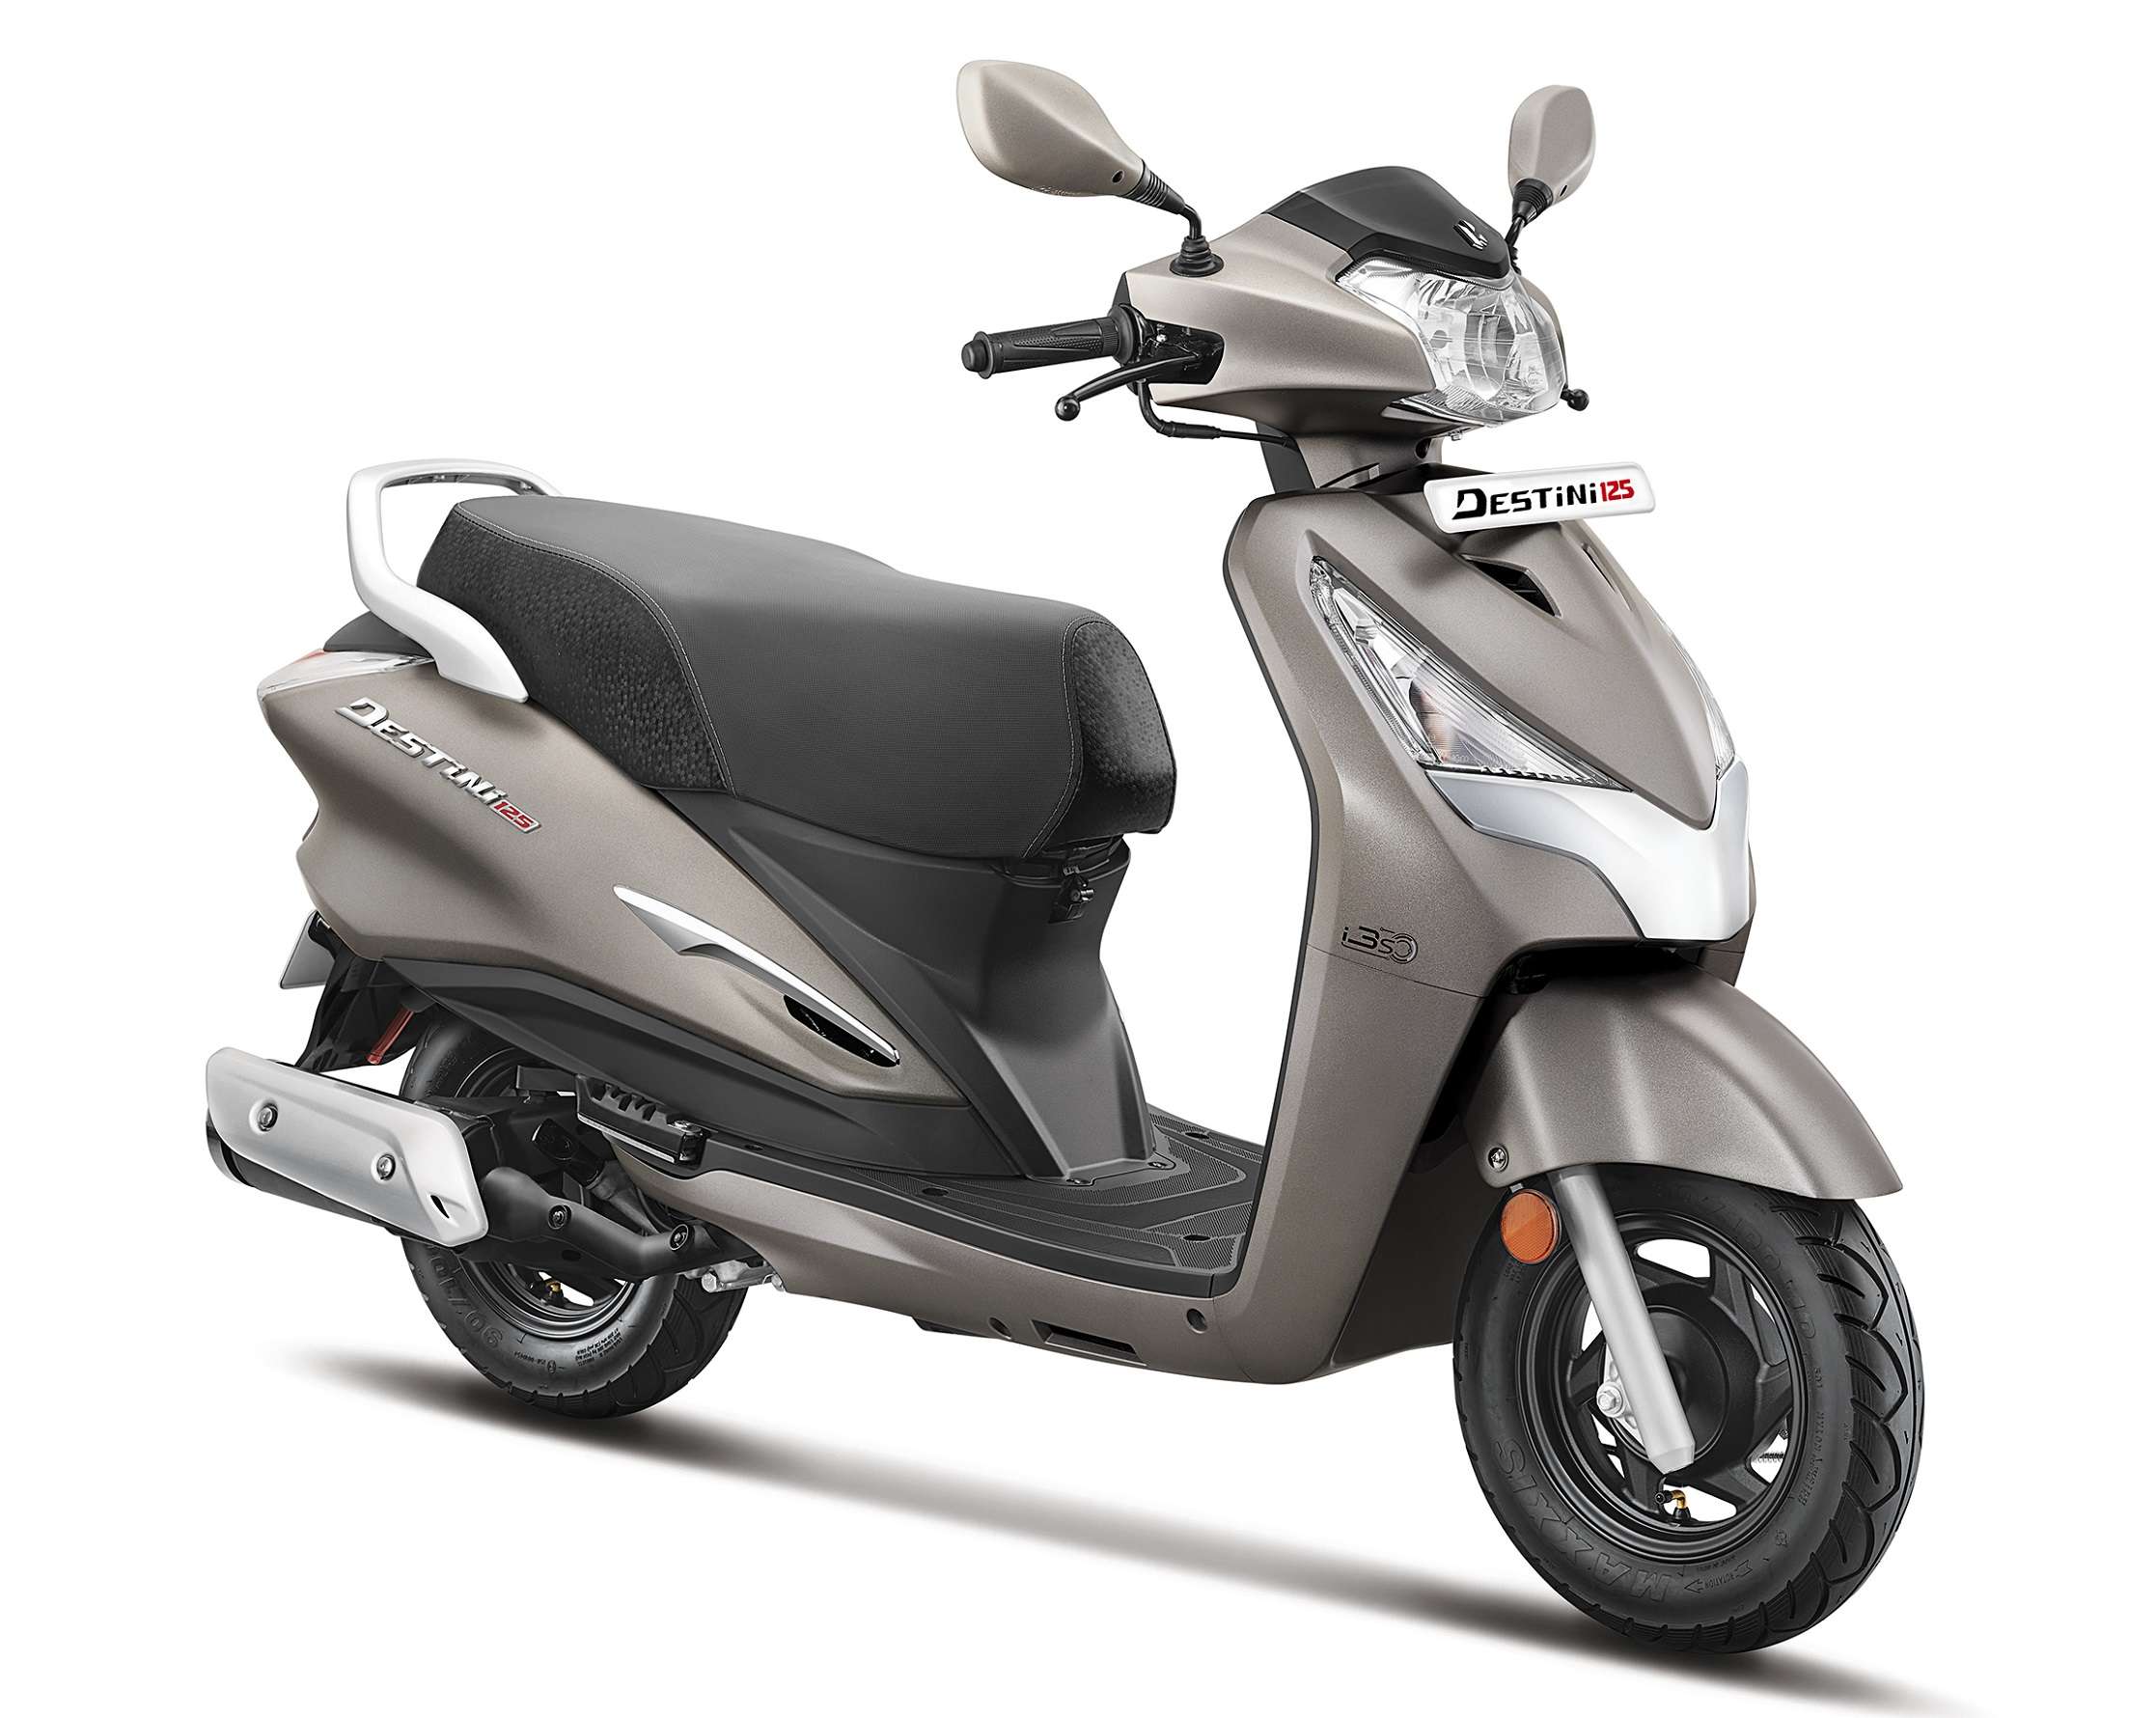 As the two-wheeler major claims, these scooters include Destini 125 and Maestro Edge 125 models.